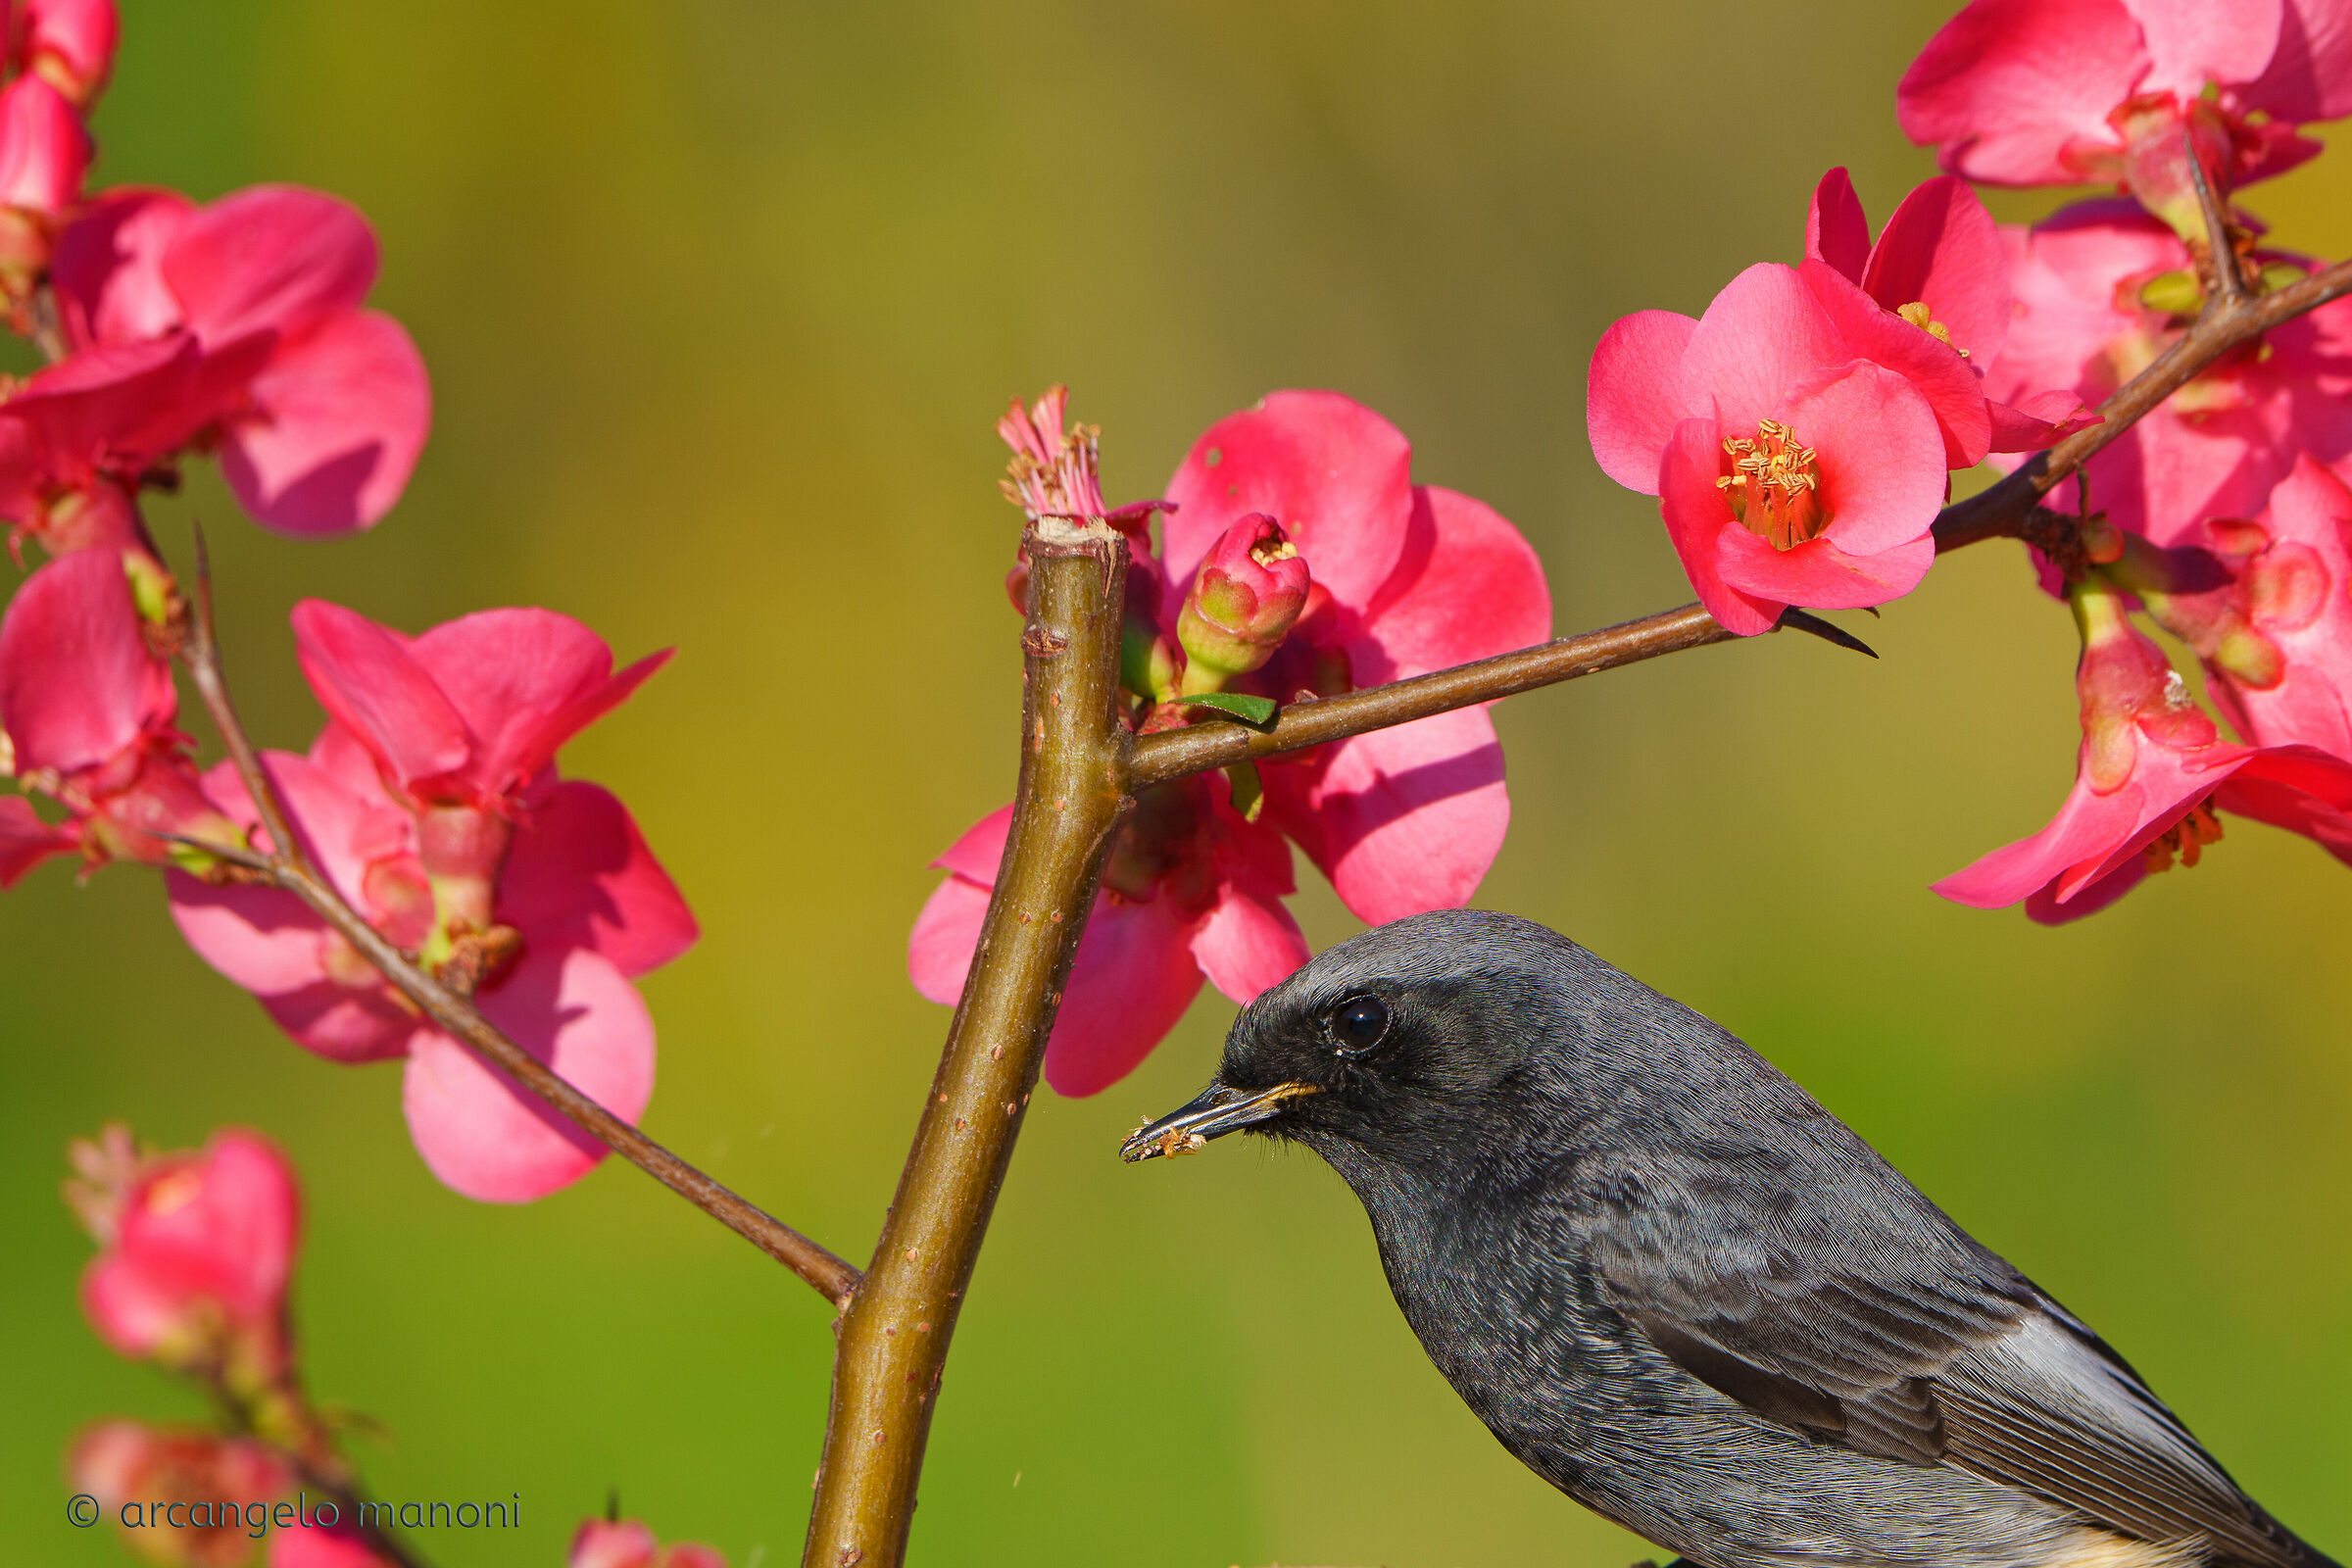 Towards spring with redstart and flowers...